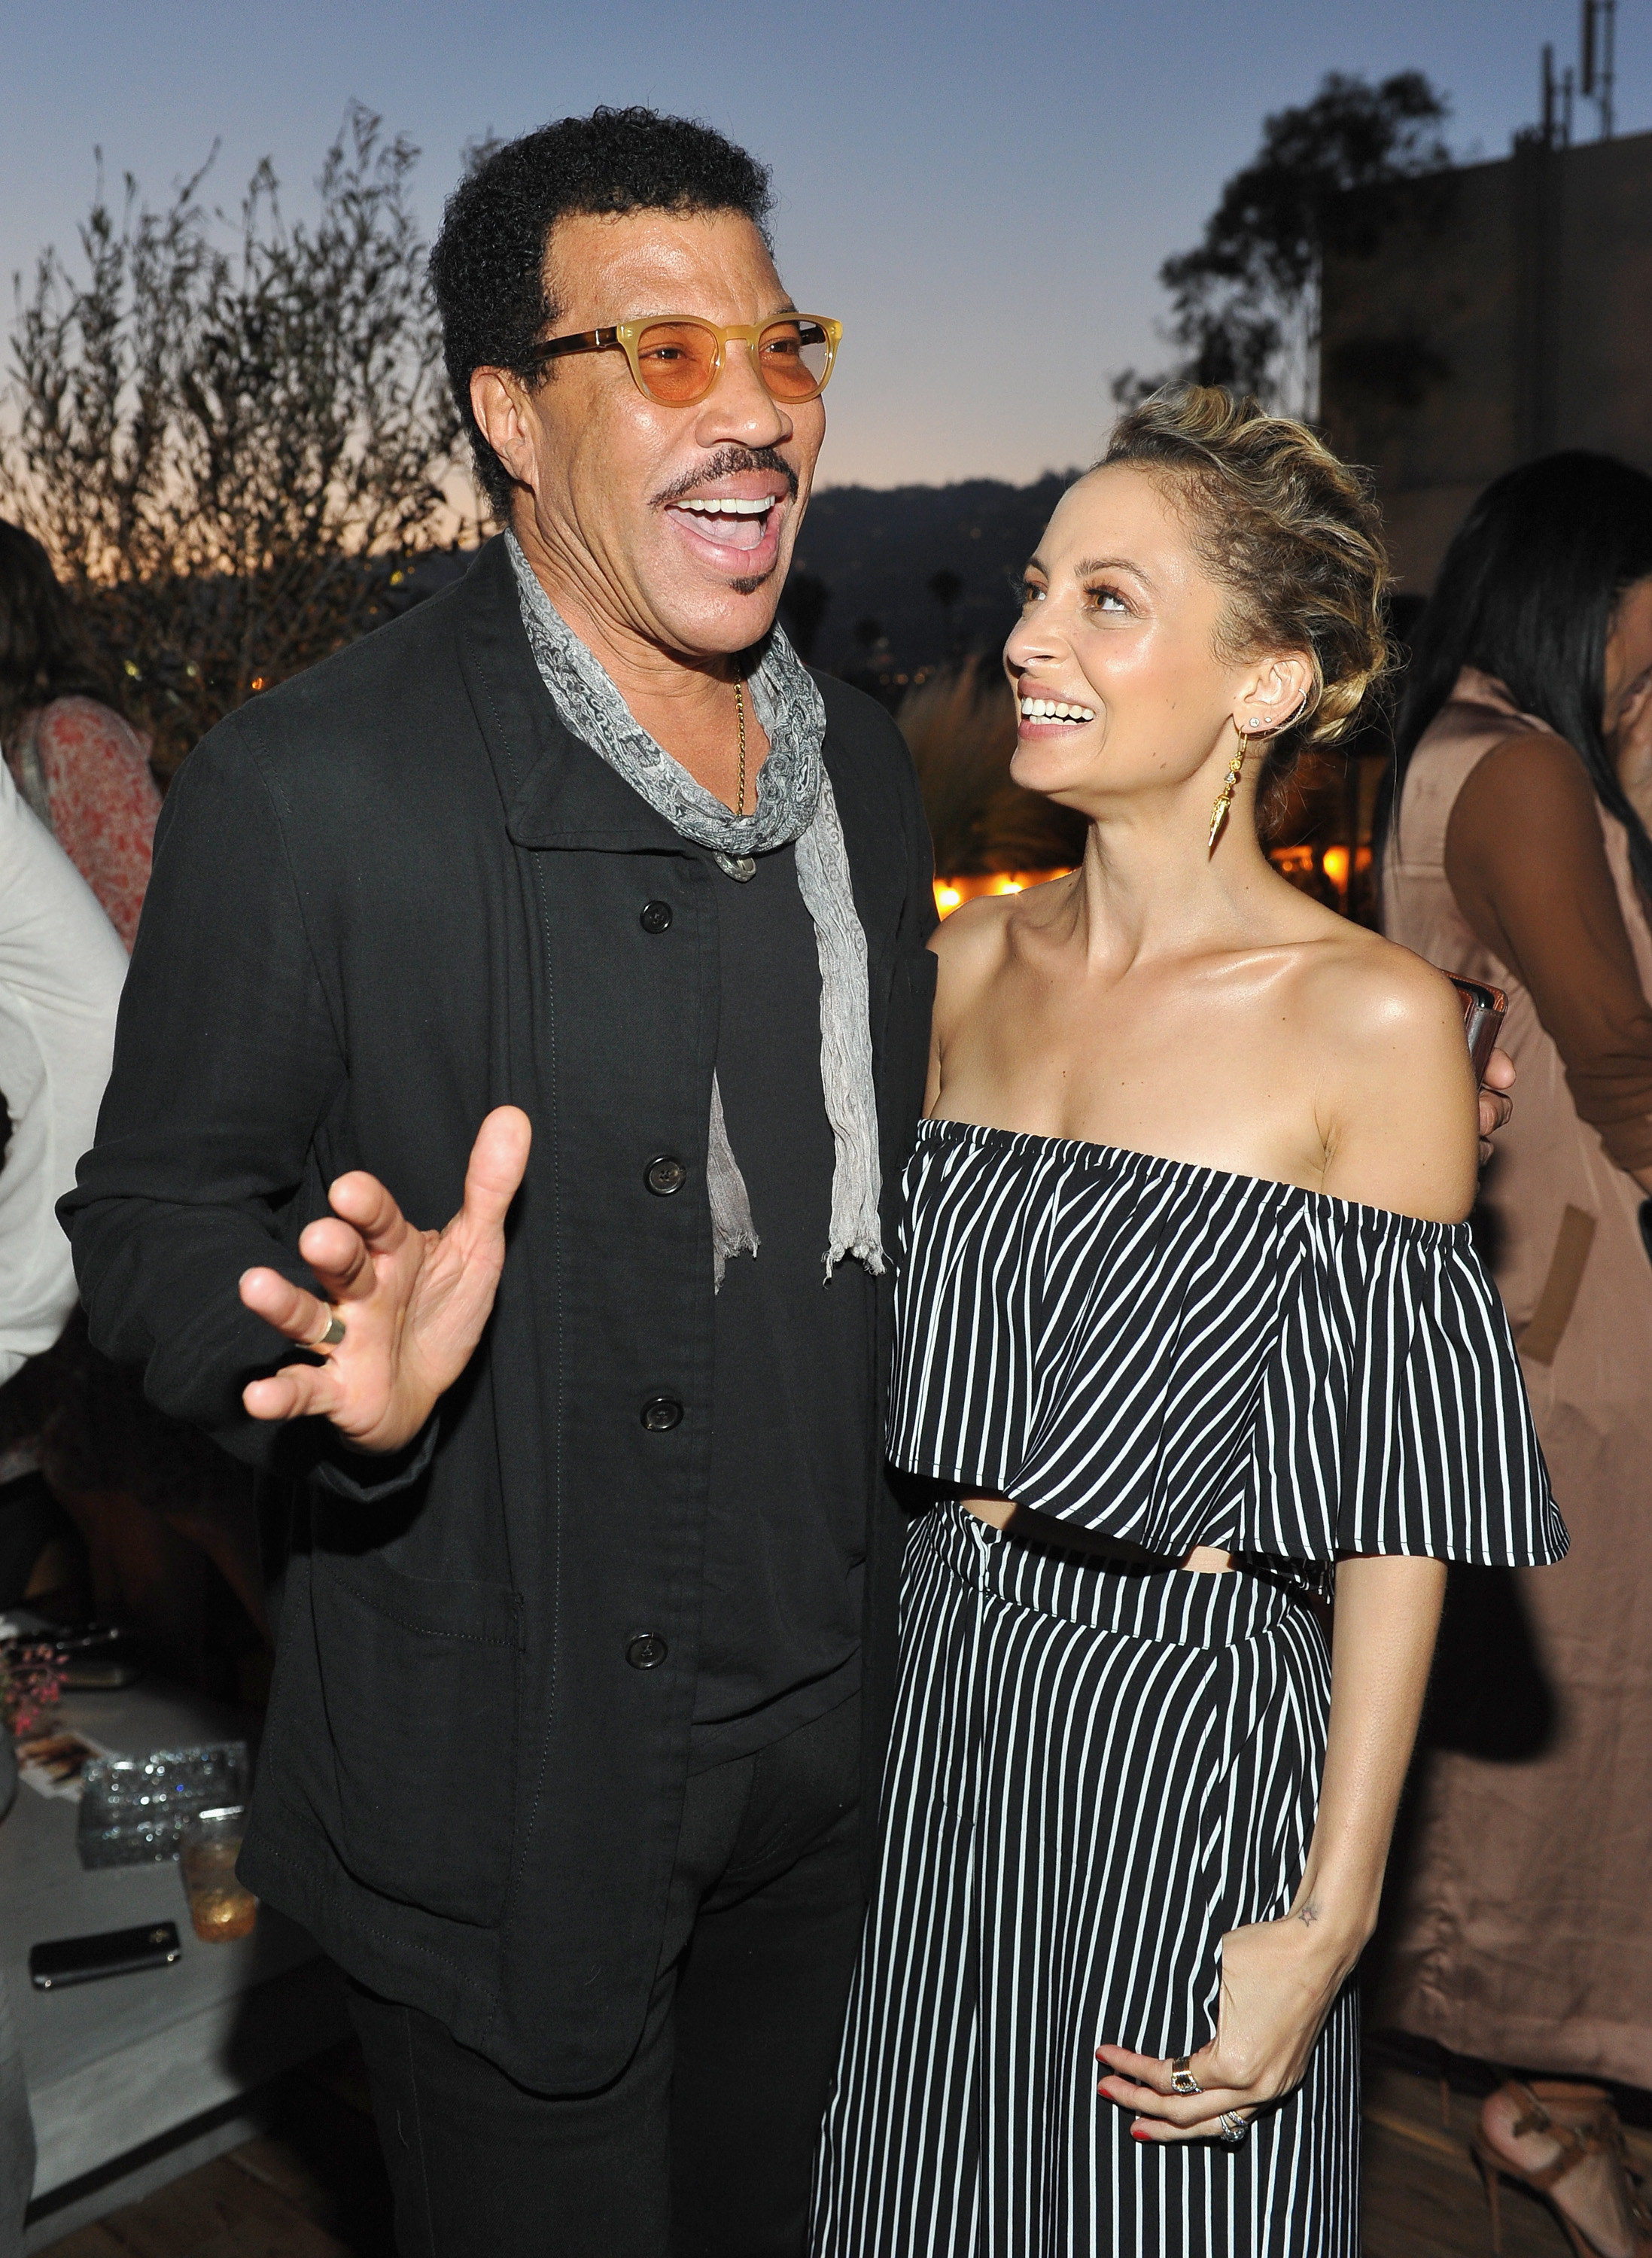 Lionel Richie and Nicole Richie pose together at the House of Harlow 1960 x REVOLVE event on June 2, 2016